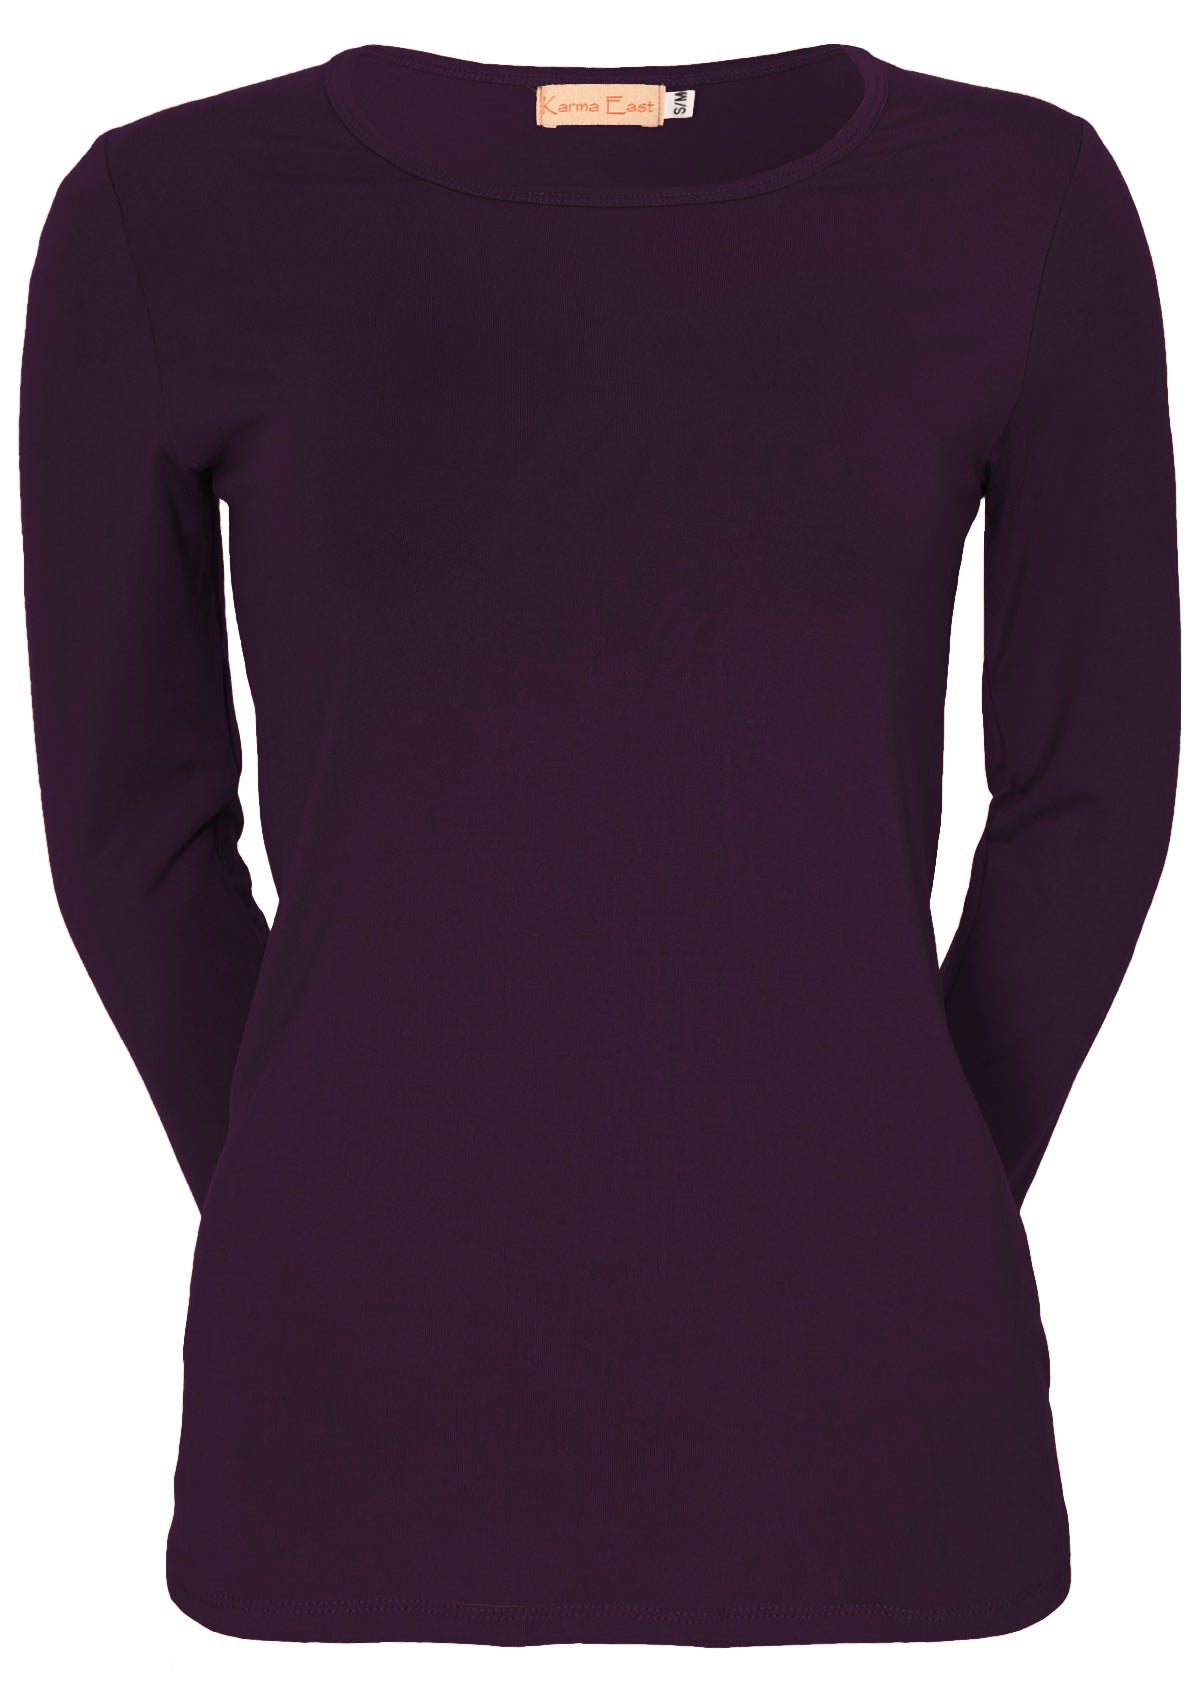 Front view of women's round neck purple long sleeve rayon top.